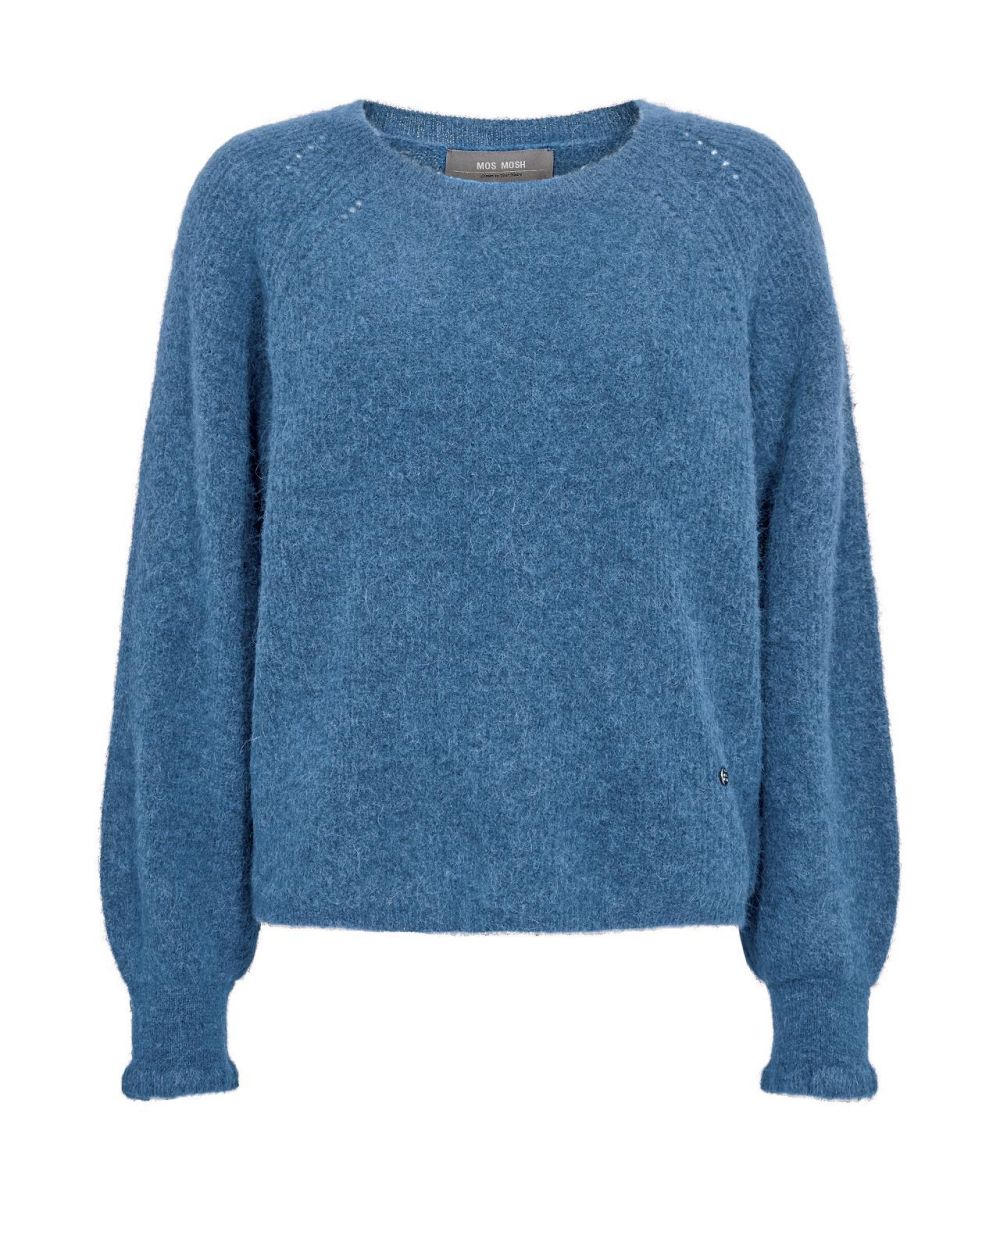 Mos Mosh Pull Blauw  (153940/468) - Corylie (Roeselare)